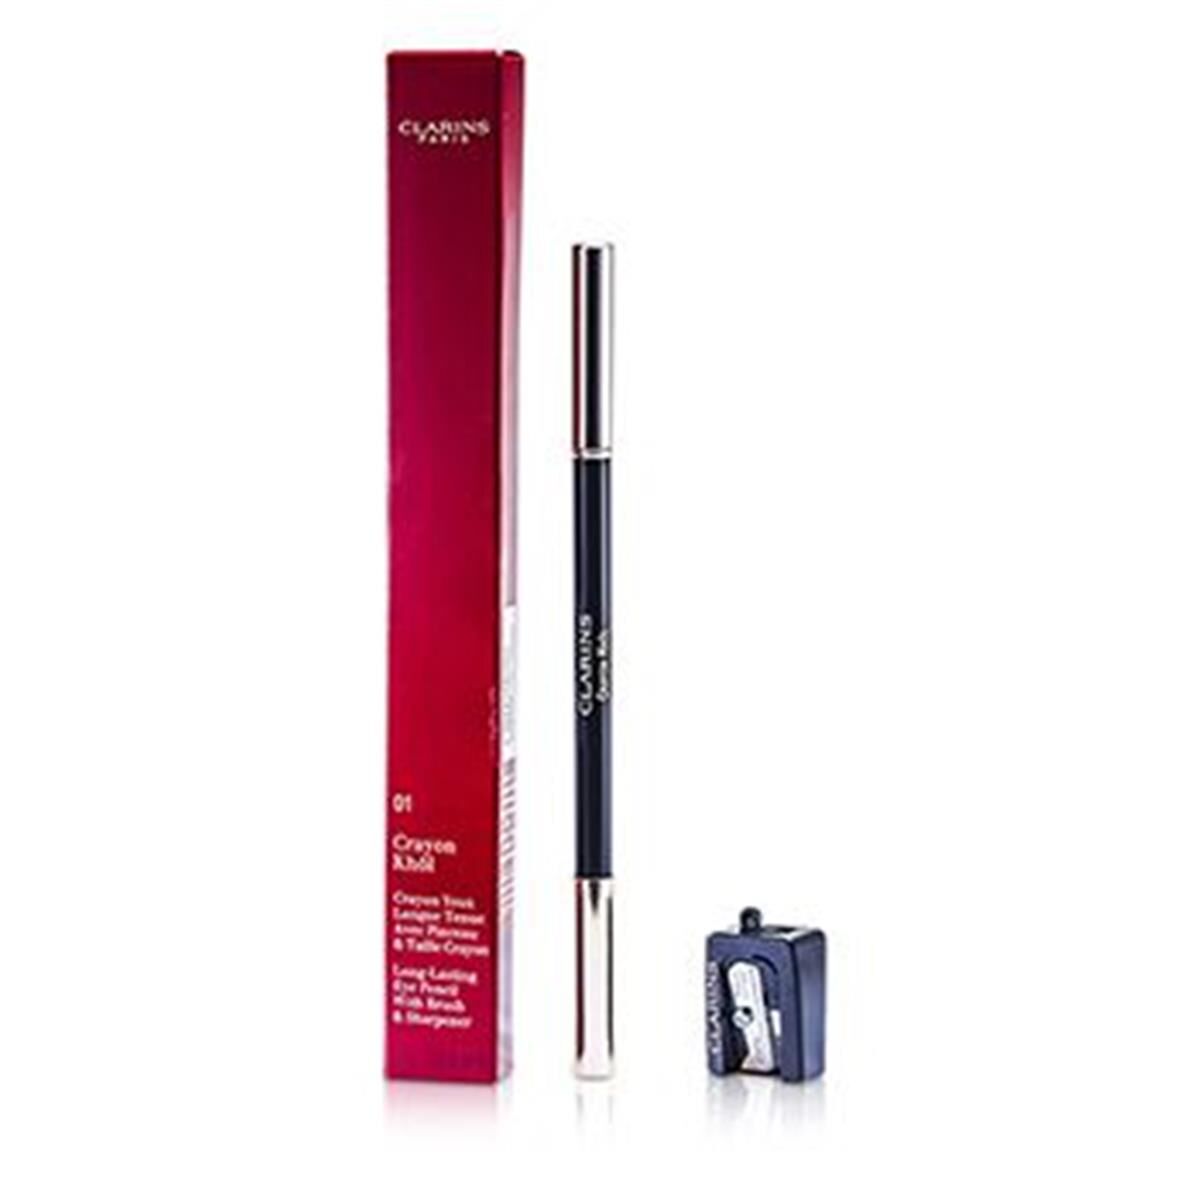 Clarins 200012 Long Lasting Eye Pencil with Brush - 01 Carbon Black with Sharpener One Size